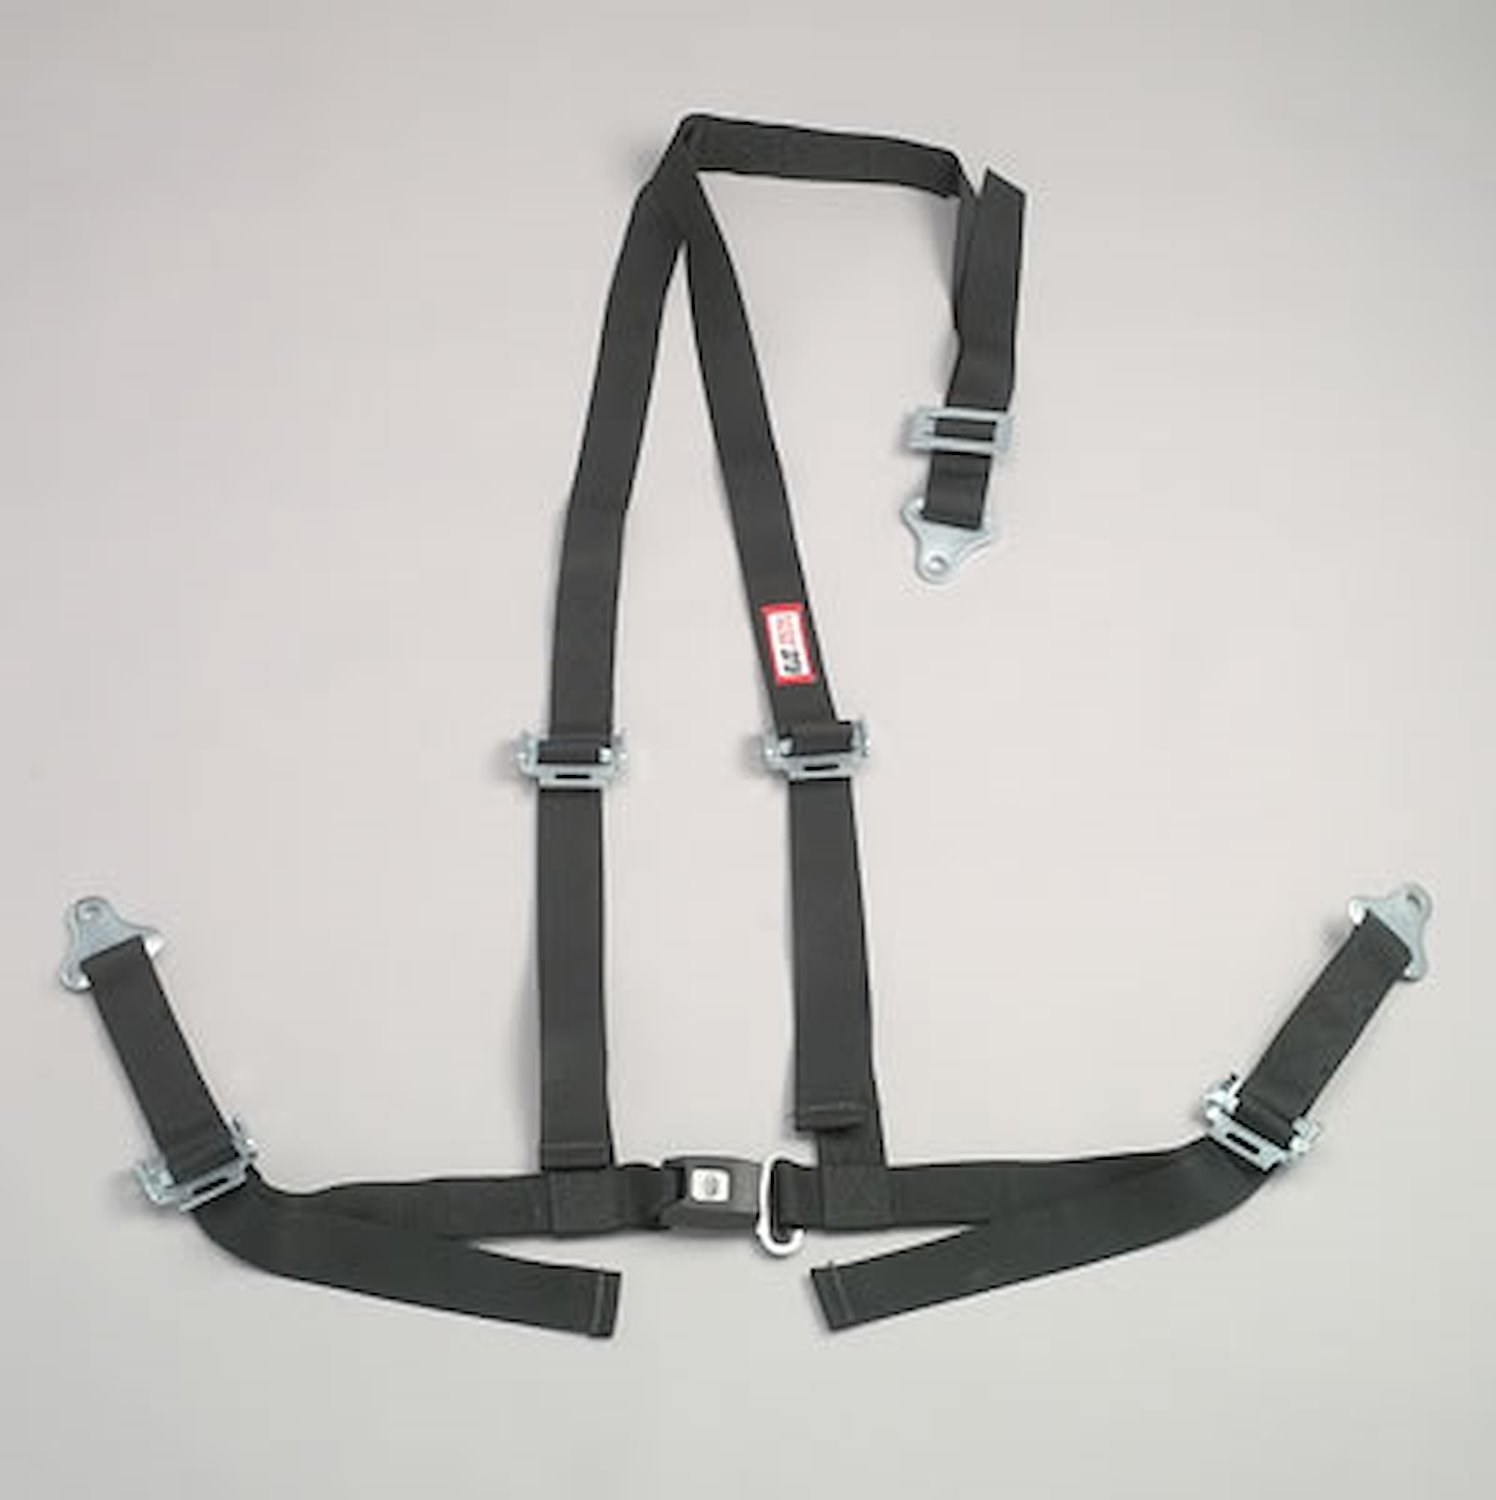 NON-SFI B&T HARNESS 2 PULL UP Lap Belt 2 S. H. V ROLL BAR Mount ALL SNAP ENDS GRAY